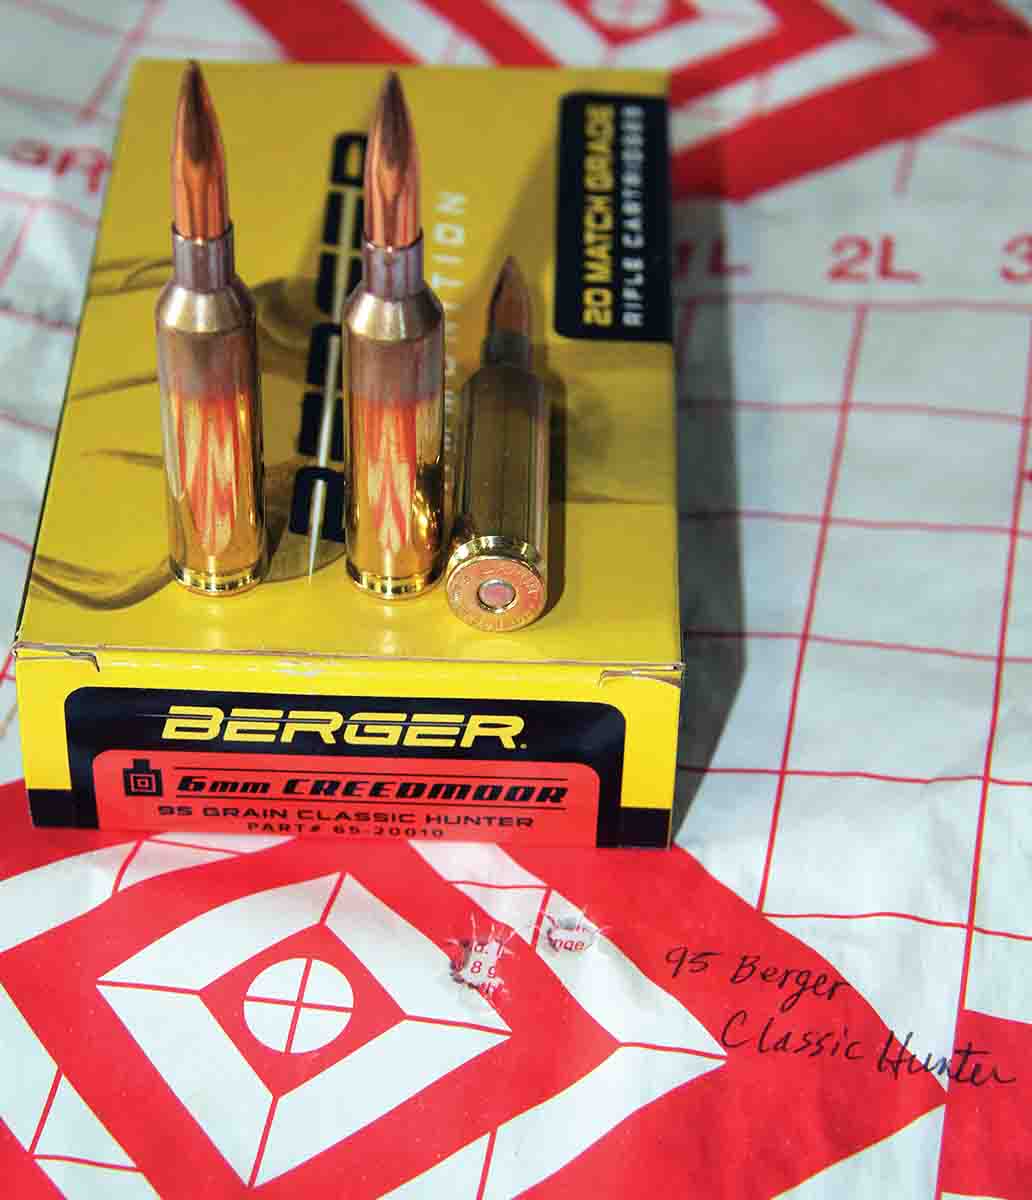 The Benelli Lupo shot its best group while shooting Berger’s 95-grain Classic Hunter factory ammunition. That group measured .49 inch and was sent at 2,827 fps.